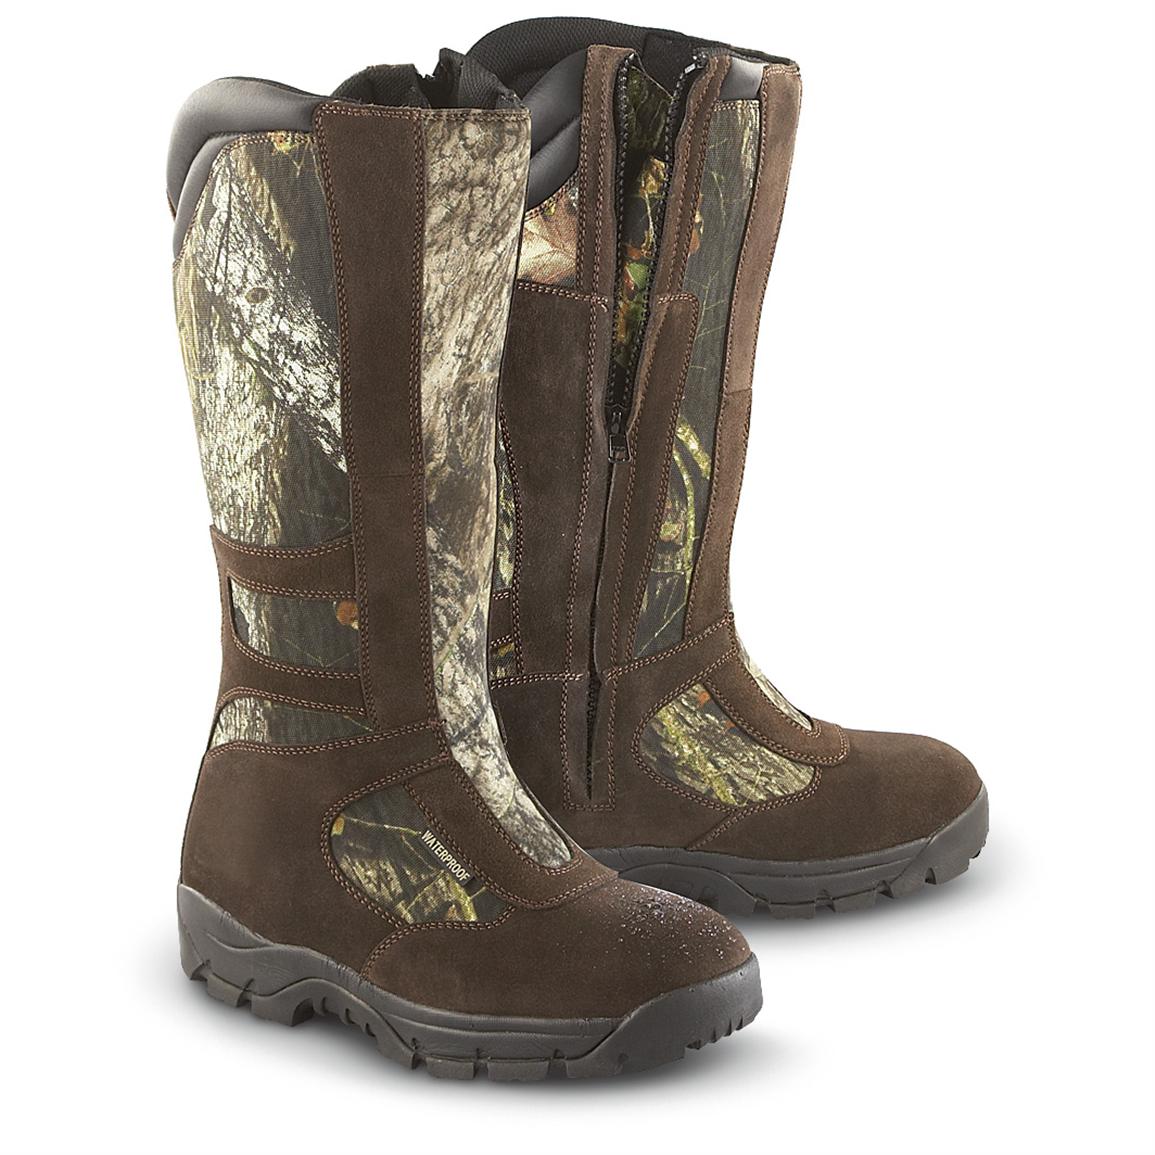 size 15 insulated rubber hunting boots